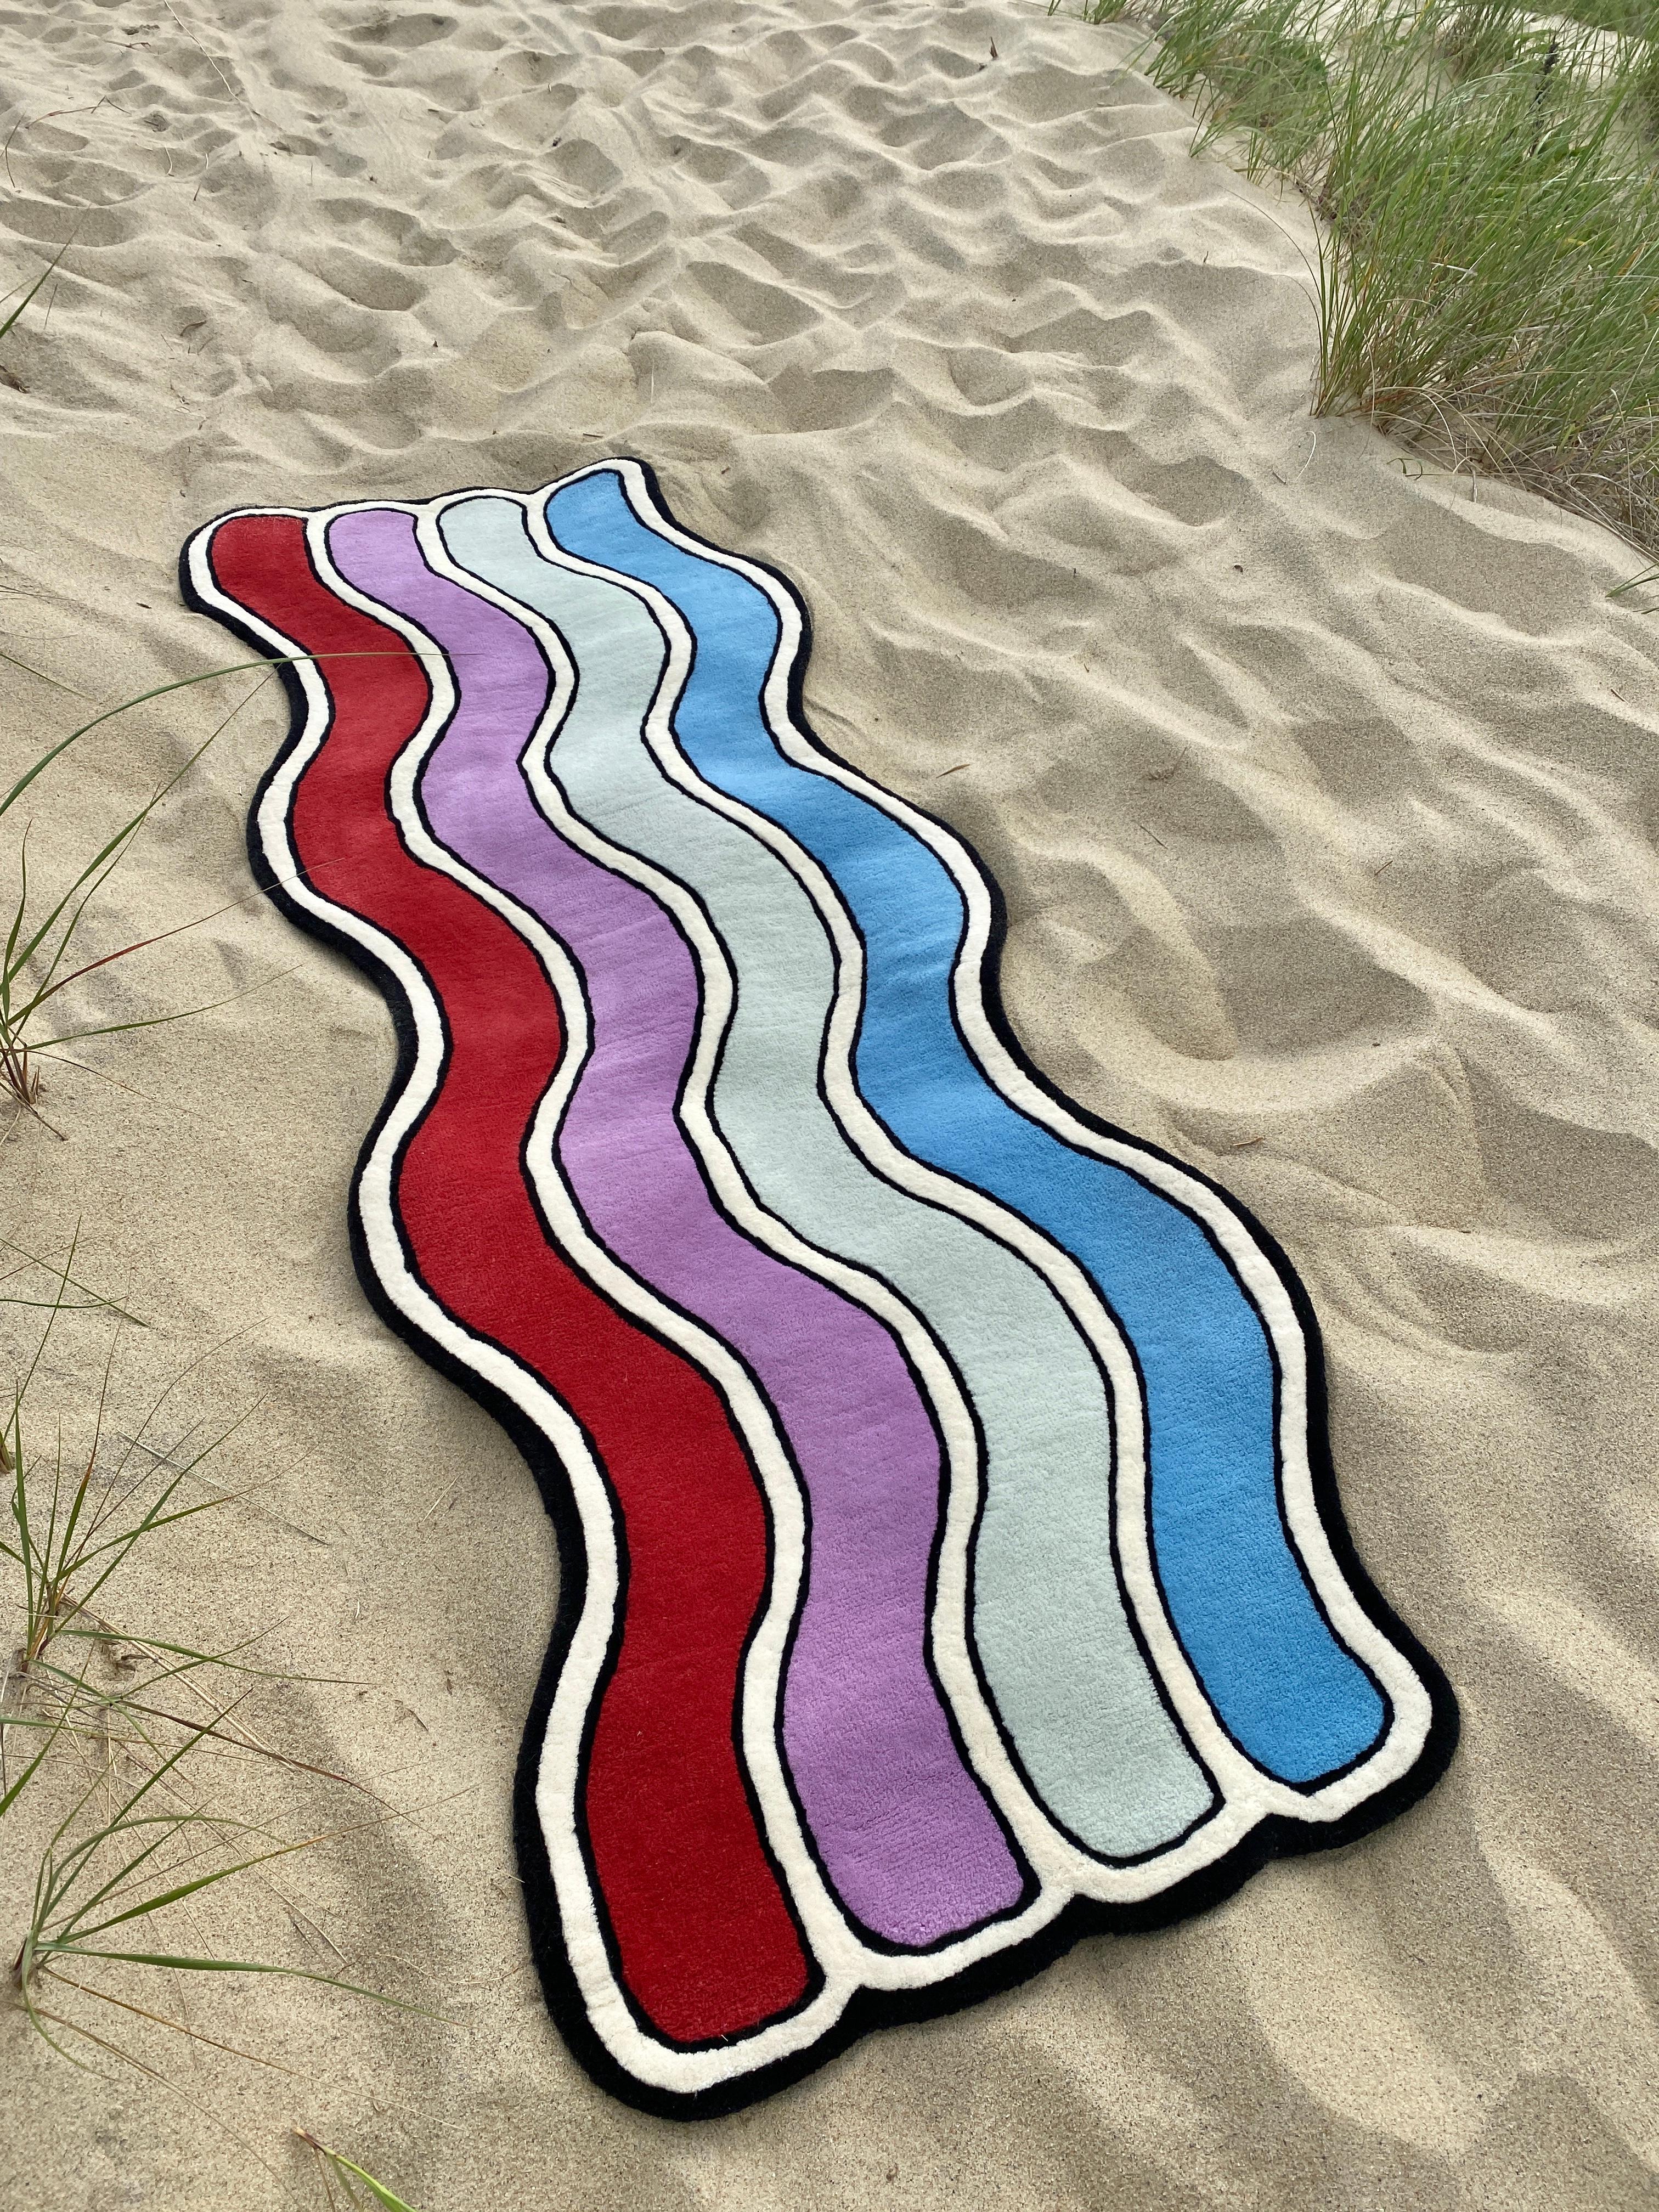 The ?Wavy Rug? is a series of rugs first exhibited in our ?Pieces Homes ?Project in Kennebunk, Maine. The Wavy Rug design concept started as a single rug composed of 10 multi-colored, undulating stripes. From there we imagined how “snippets” of the